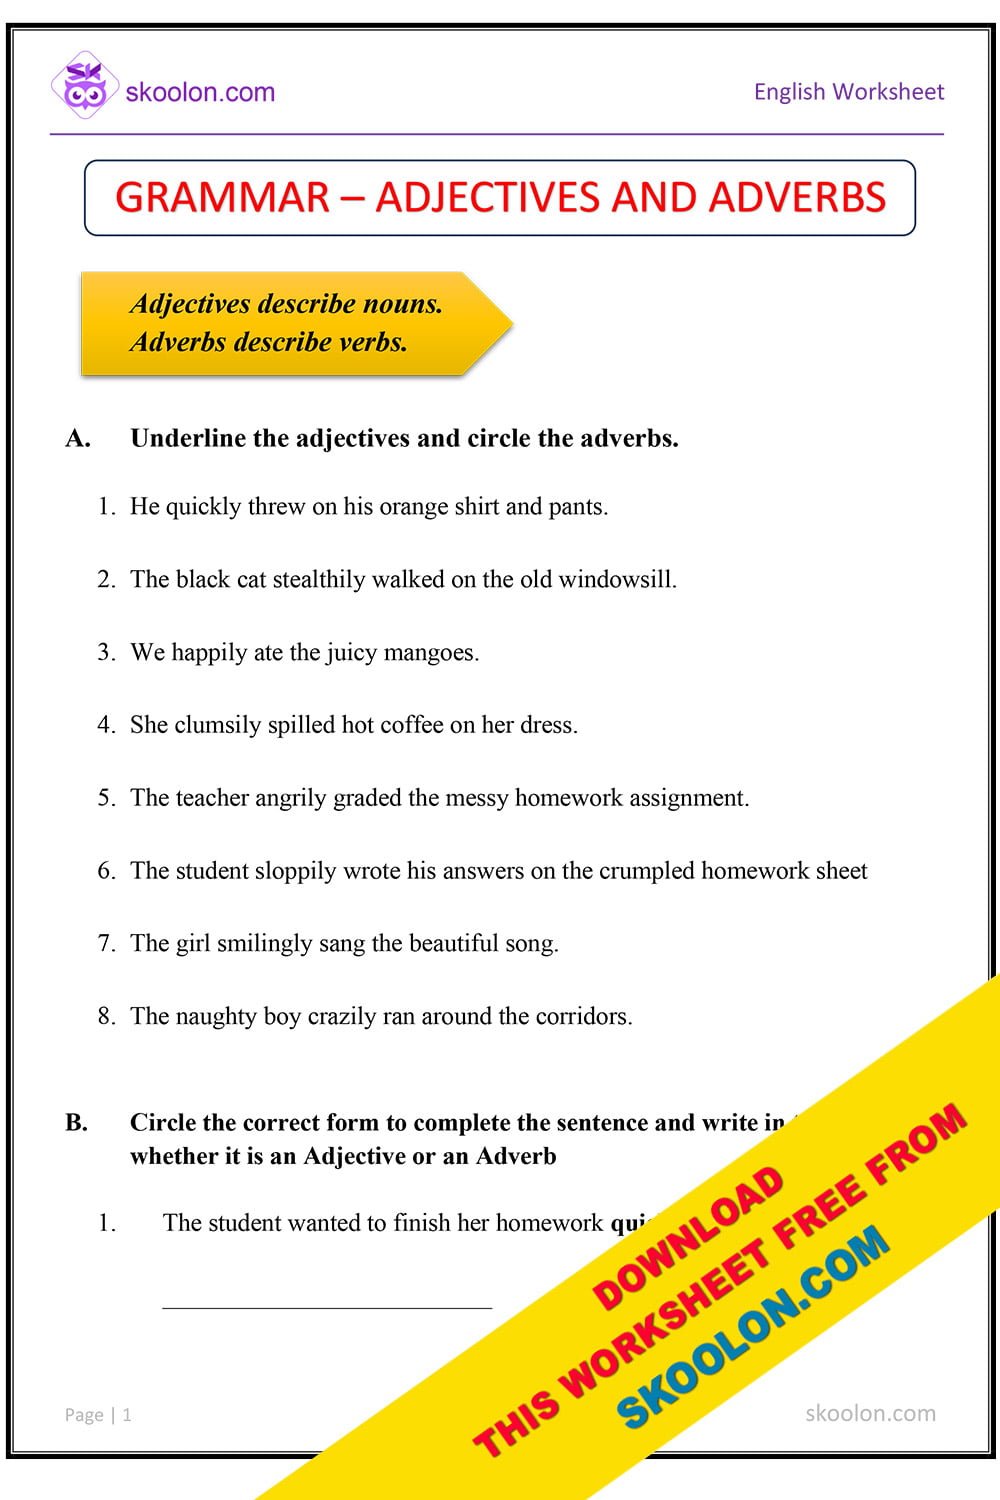 adjectives-and-adverbs-worksheet-skoolon